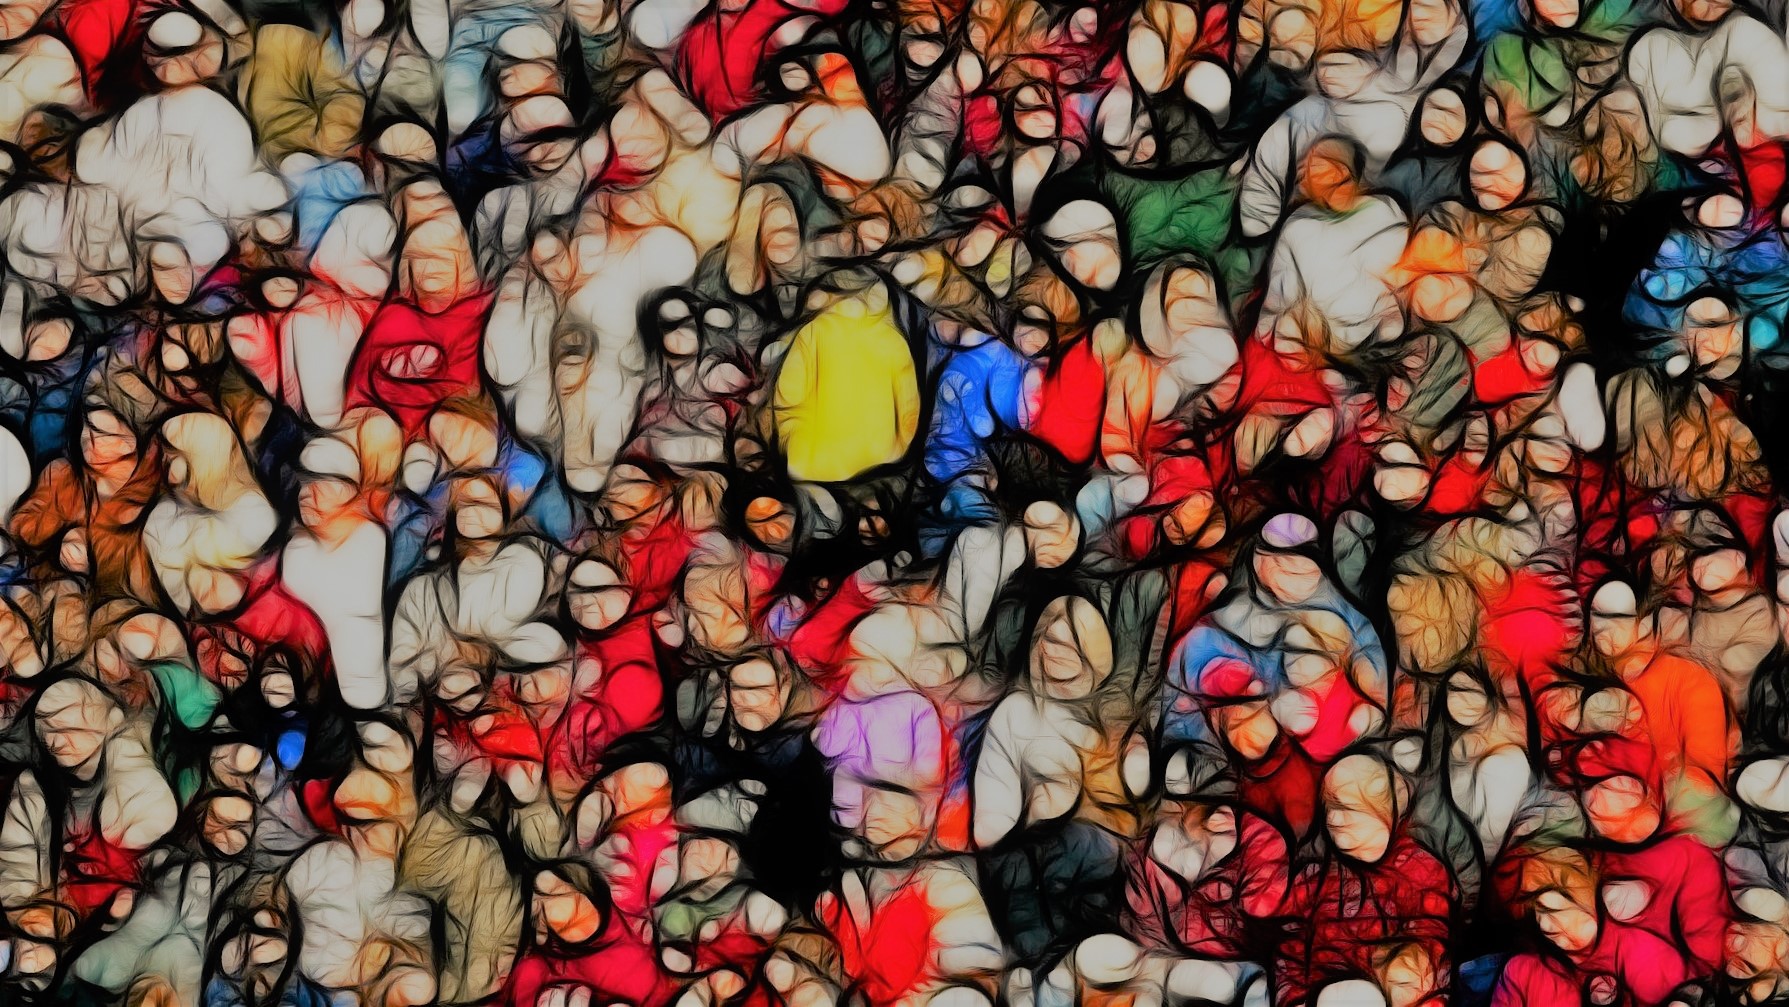 Abstract Crowd